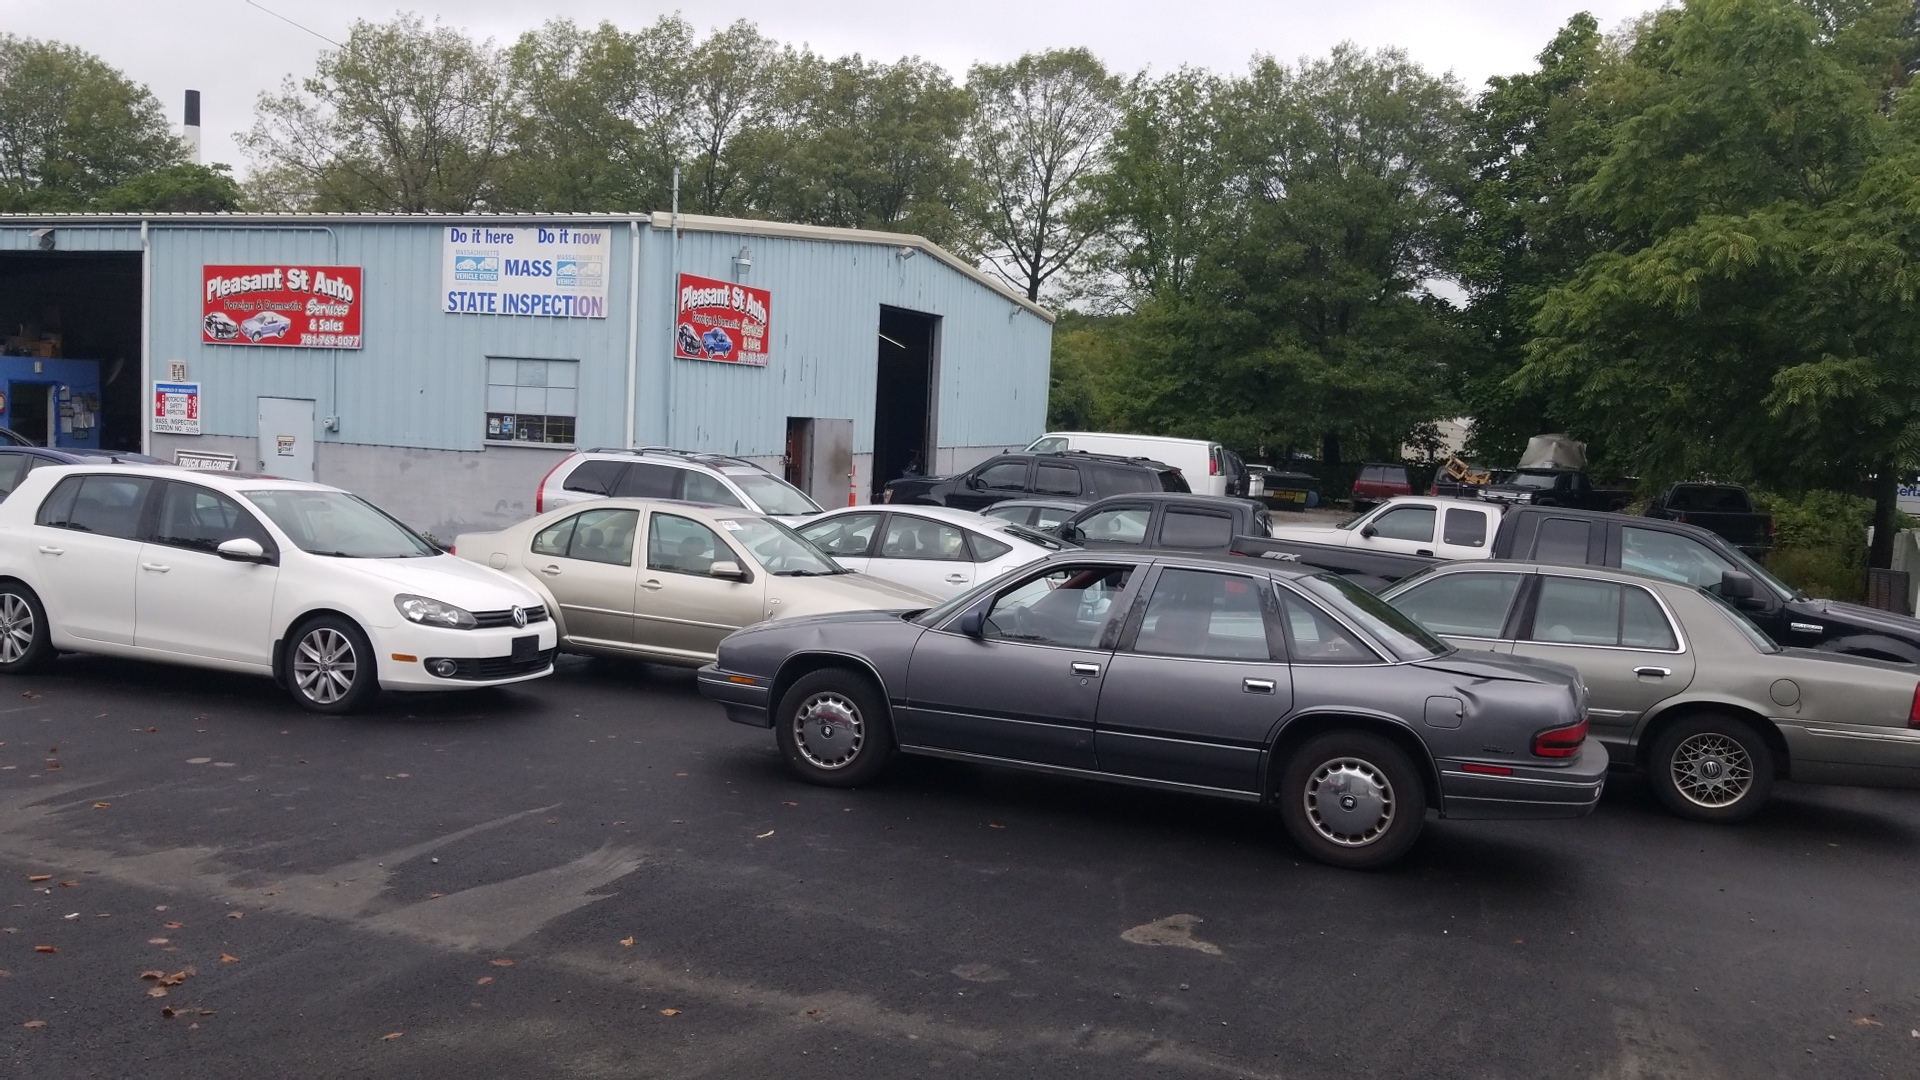 Pleasant Street Auto and Truck Service